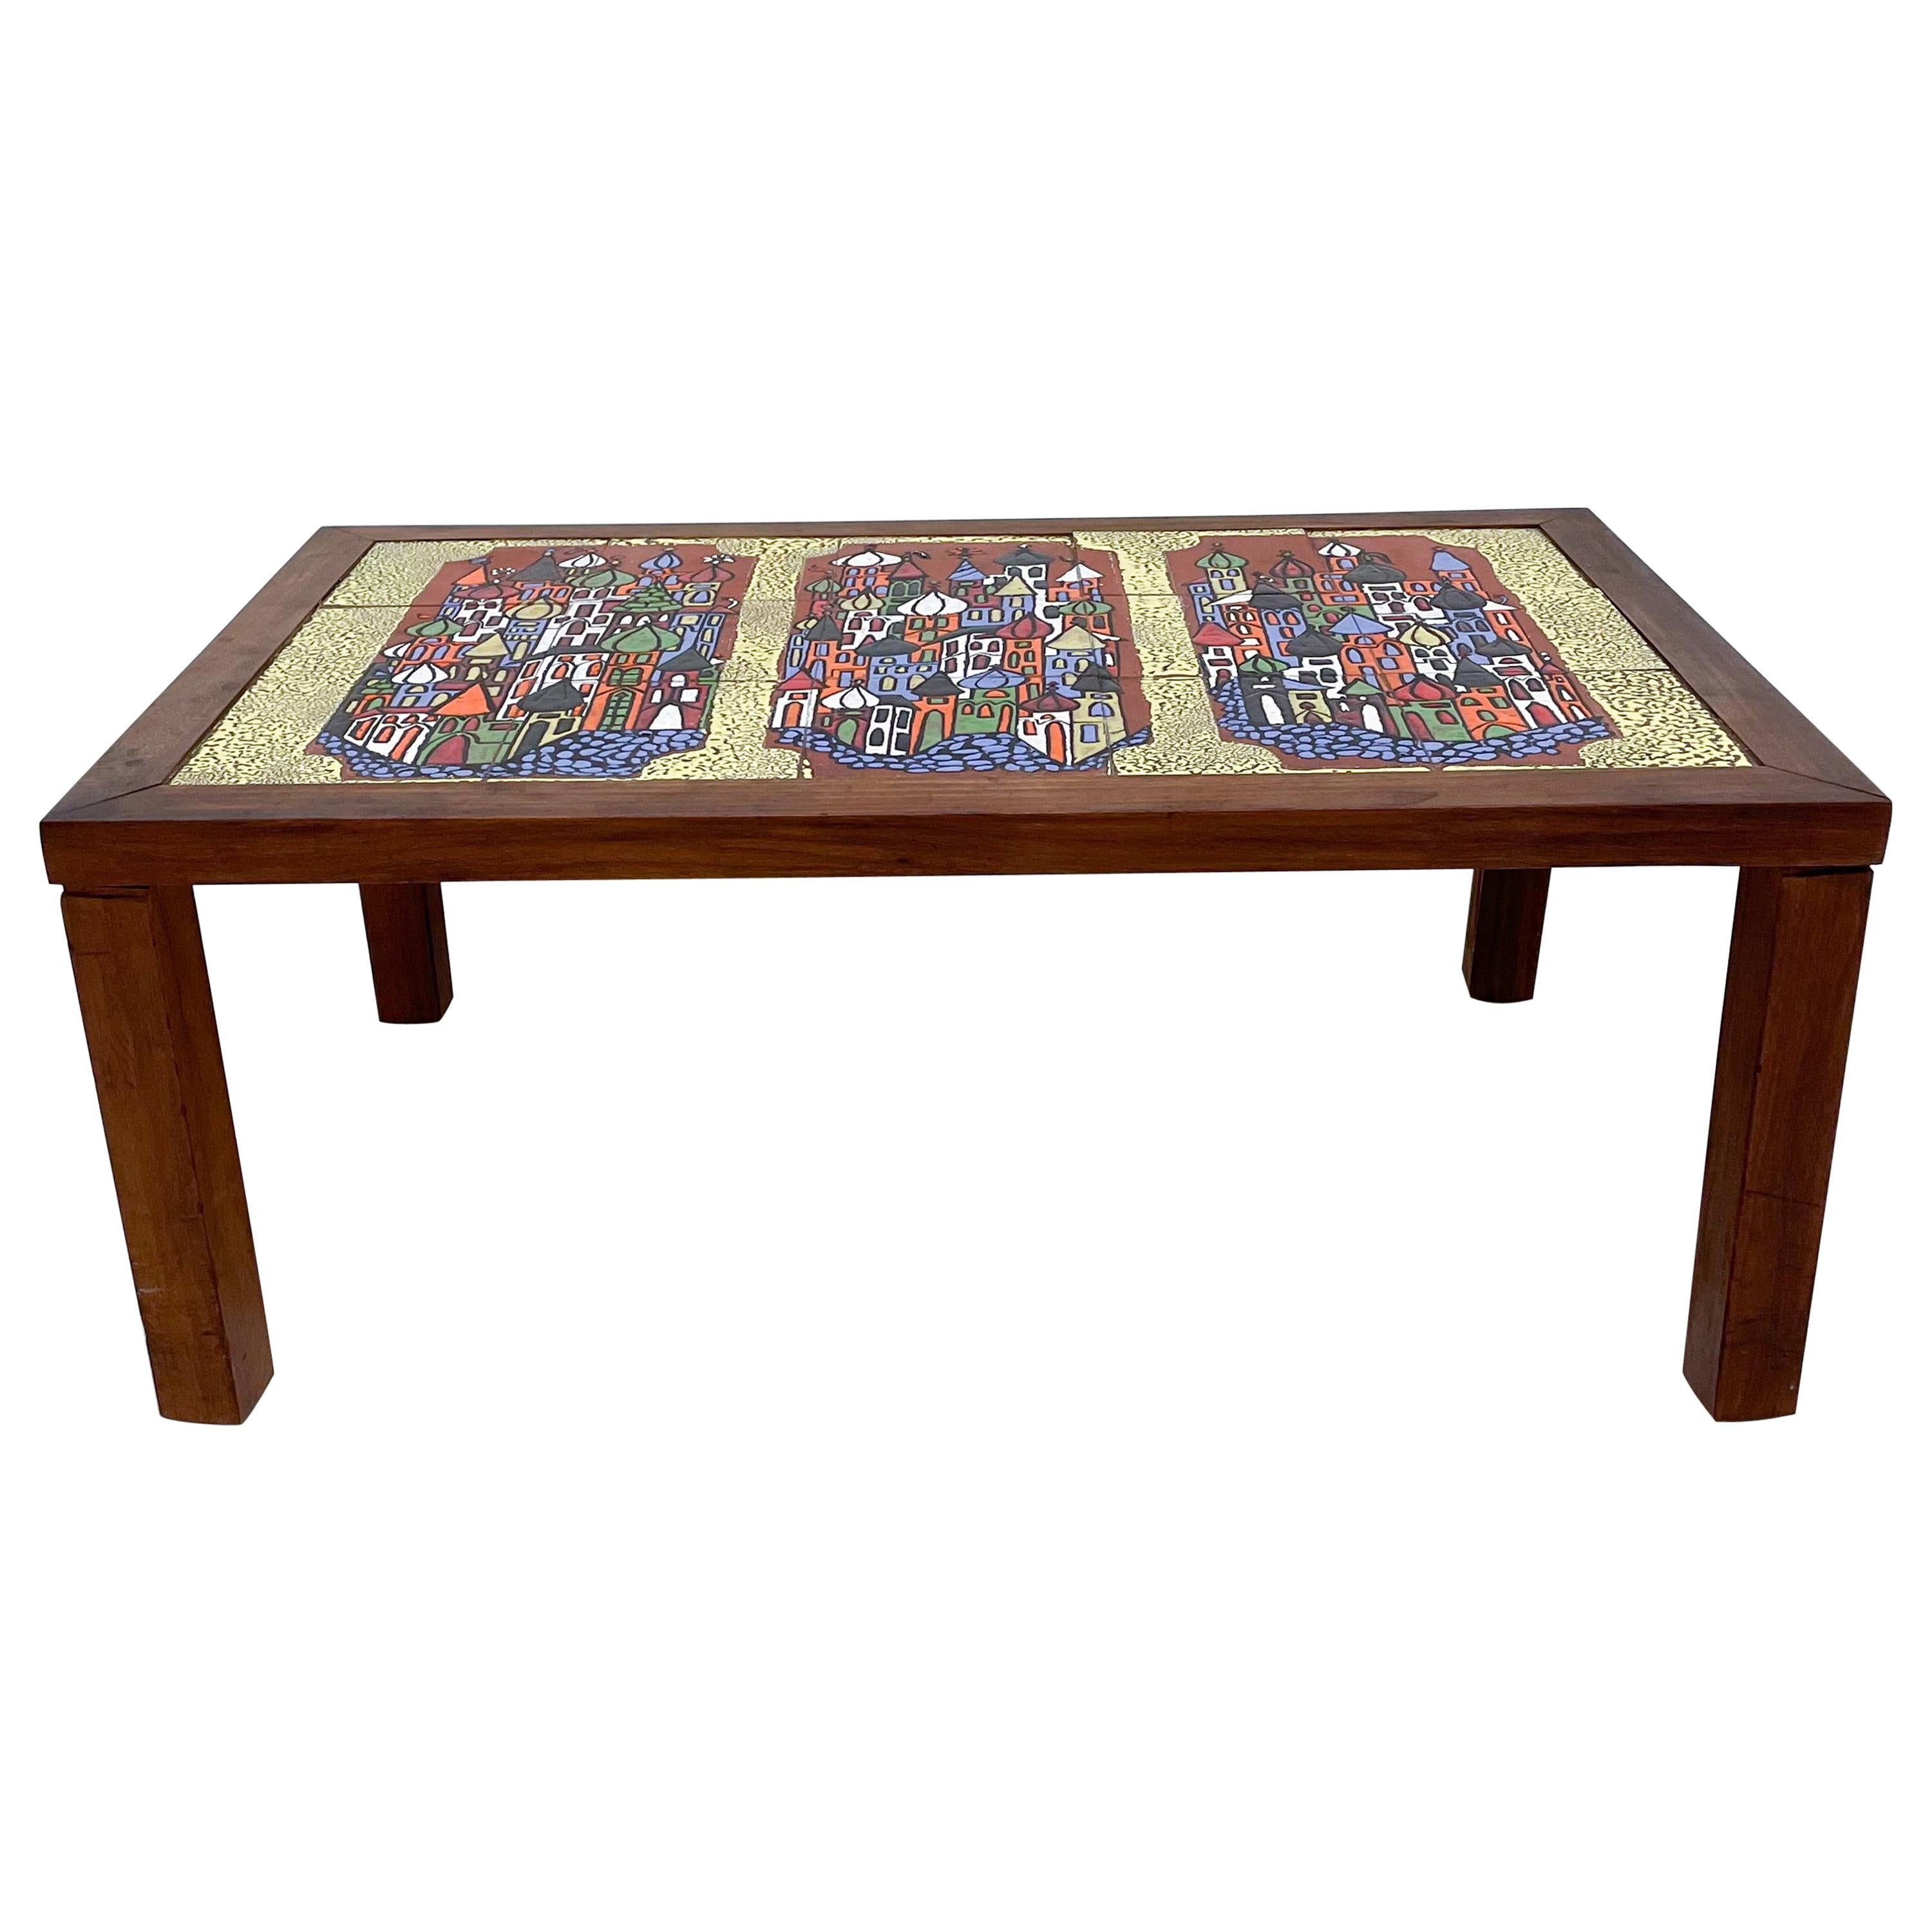 AMBIANIC presents
Decorative Wood Coffee Table with Colorful Ceramic Tiles Russian Illustrations 
Coffee Table in the manner of Roger Capron 1970s Tiled designs
No maker label present. 
Measures: 33.25W x 21.5